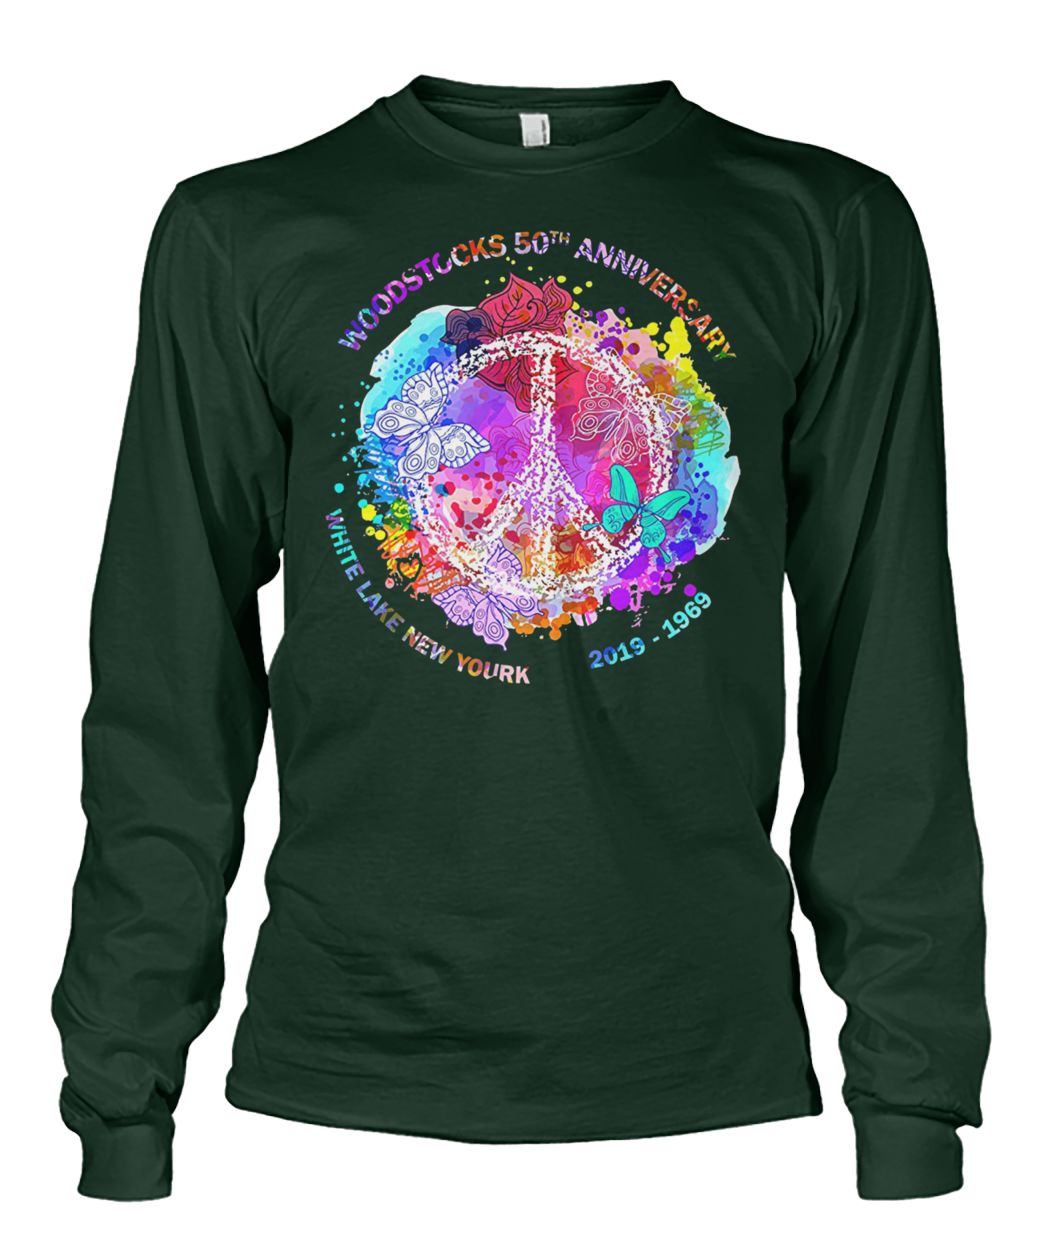 Hippie woodstock 50th anniversary 1969-2019 peace and love unisex long sleeve